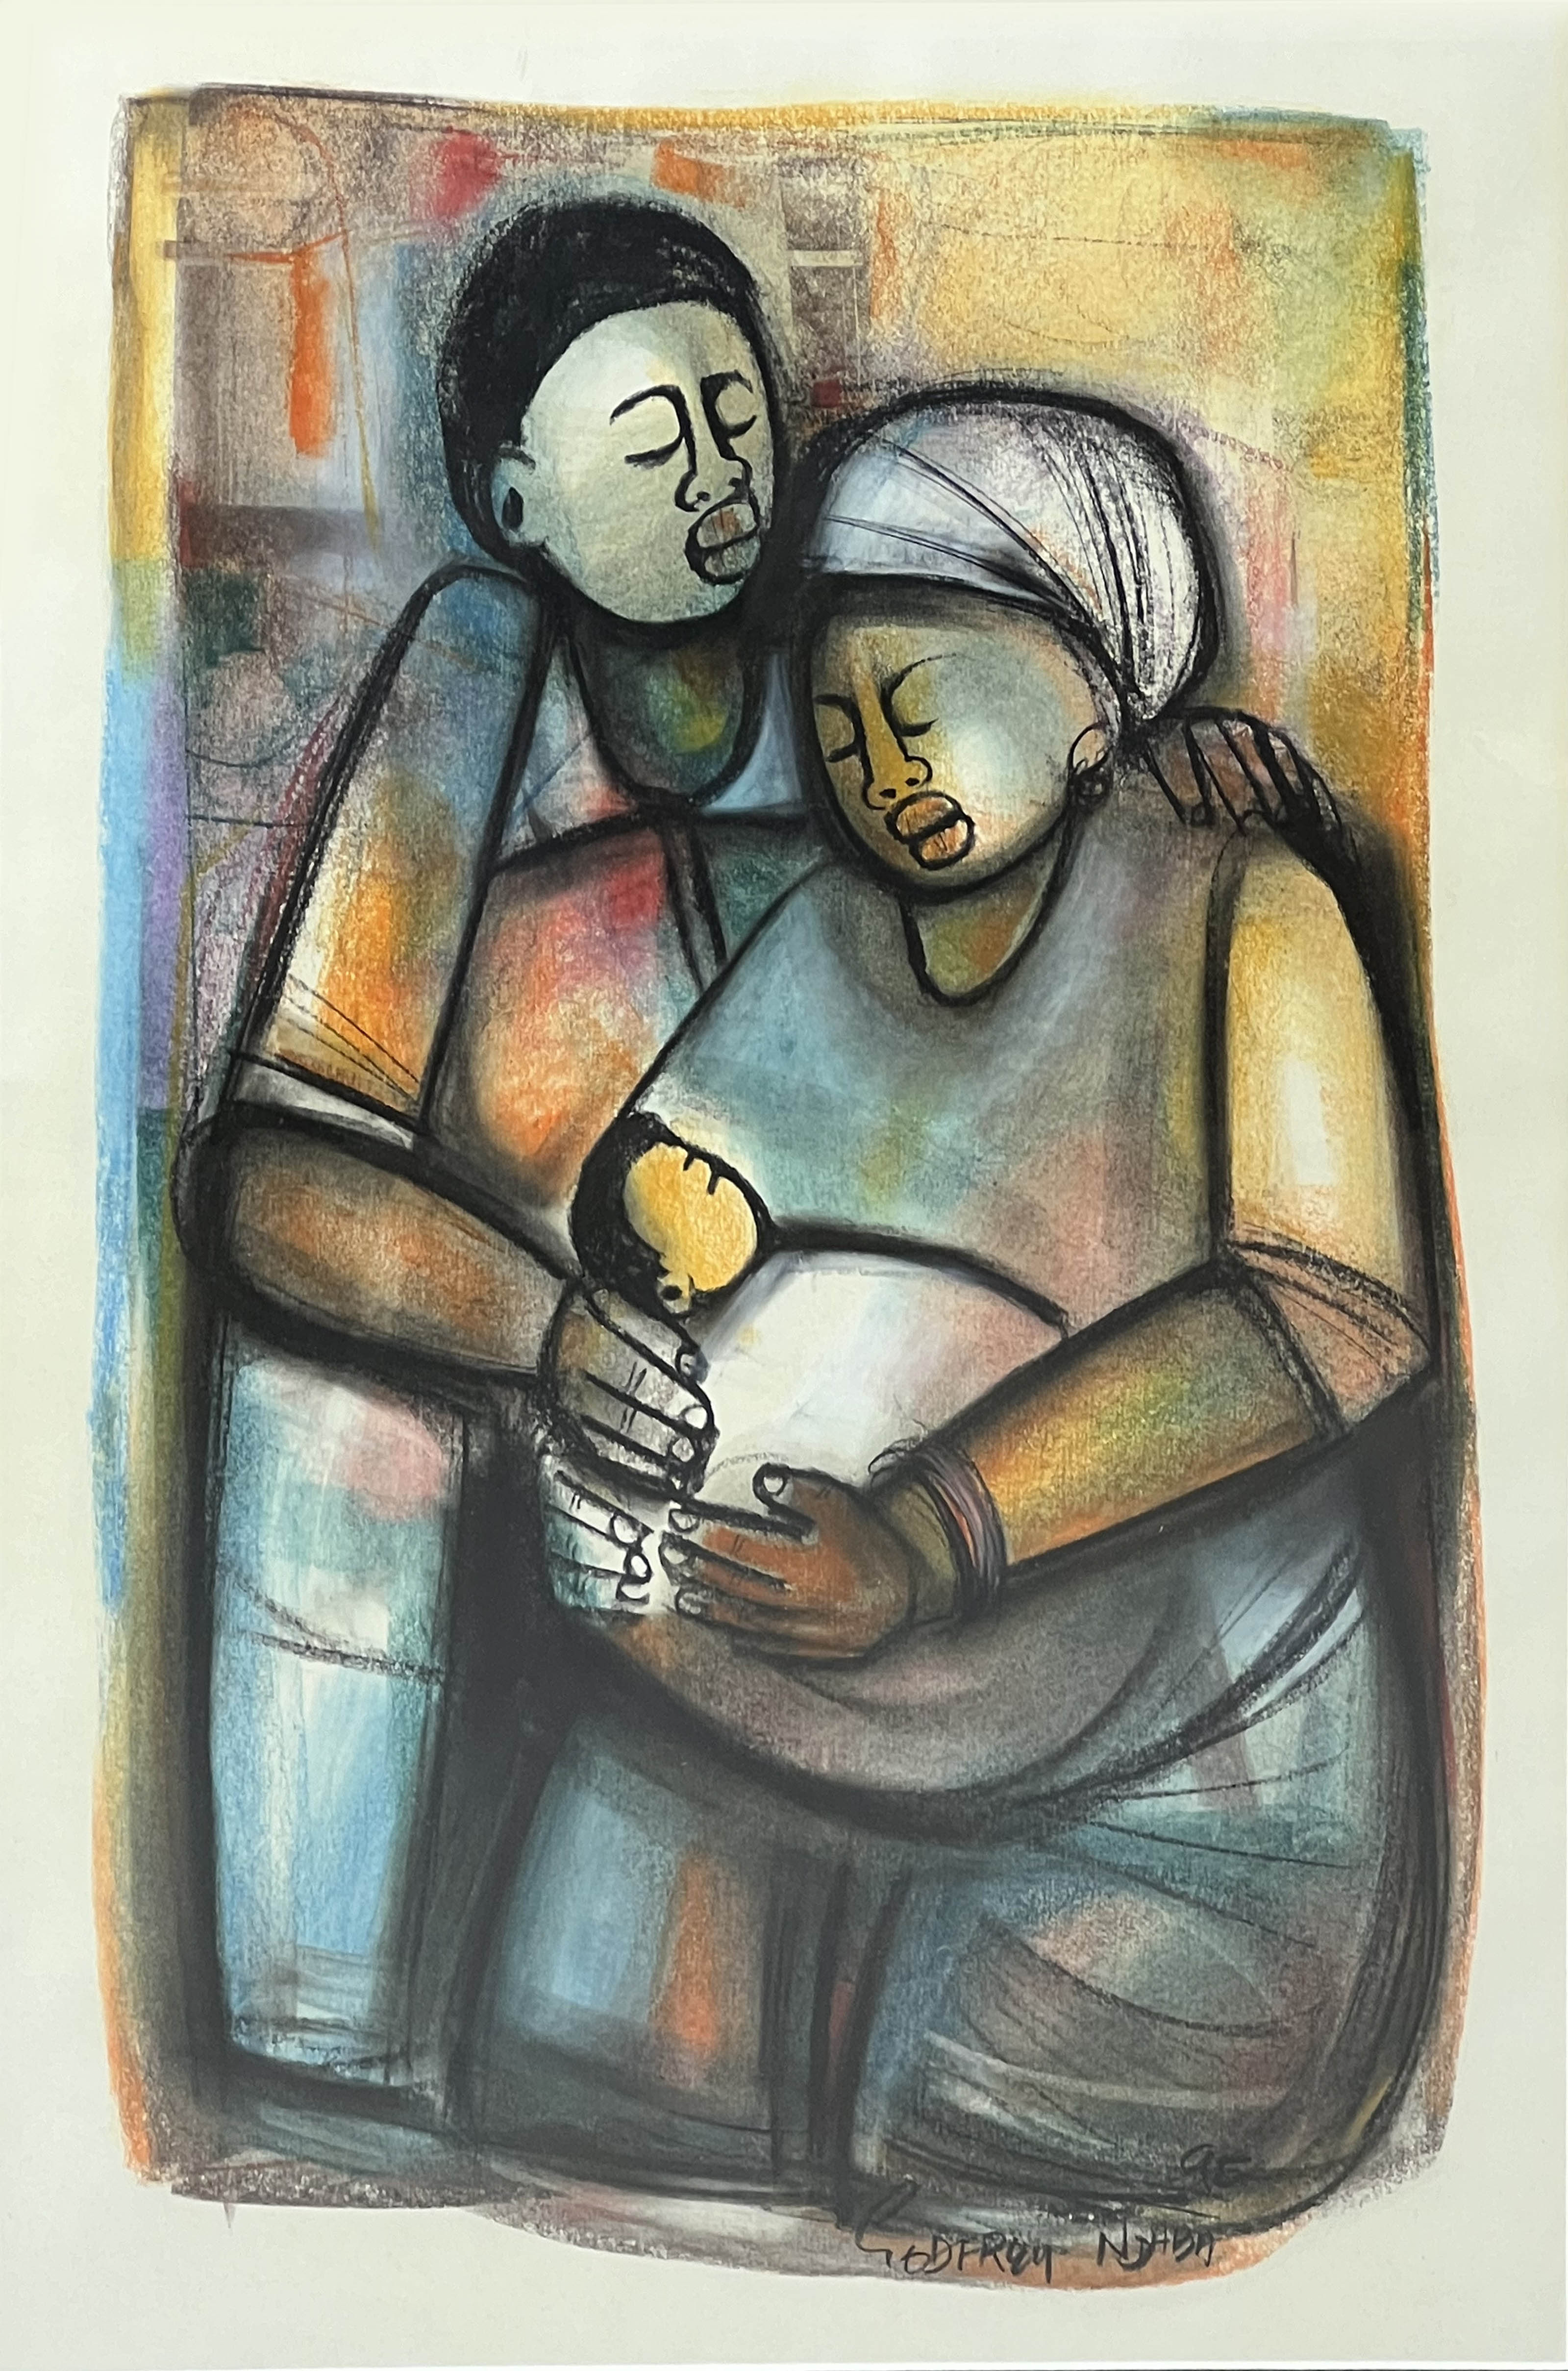 GODFREY NDABA (born 1947, South Africa) 'Family', crayon and water colour, 53cm x 40cm, signed and - Image 3 of 3